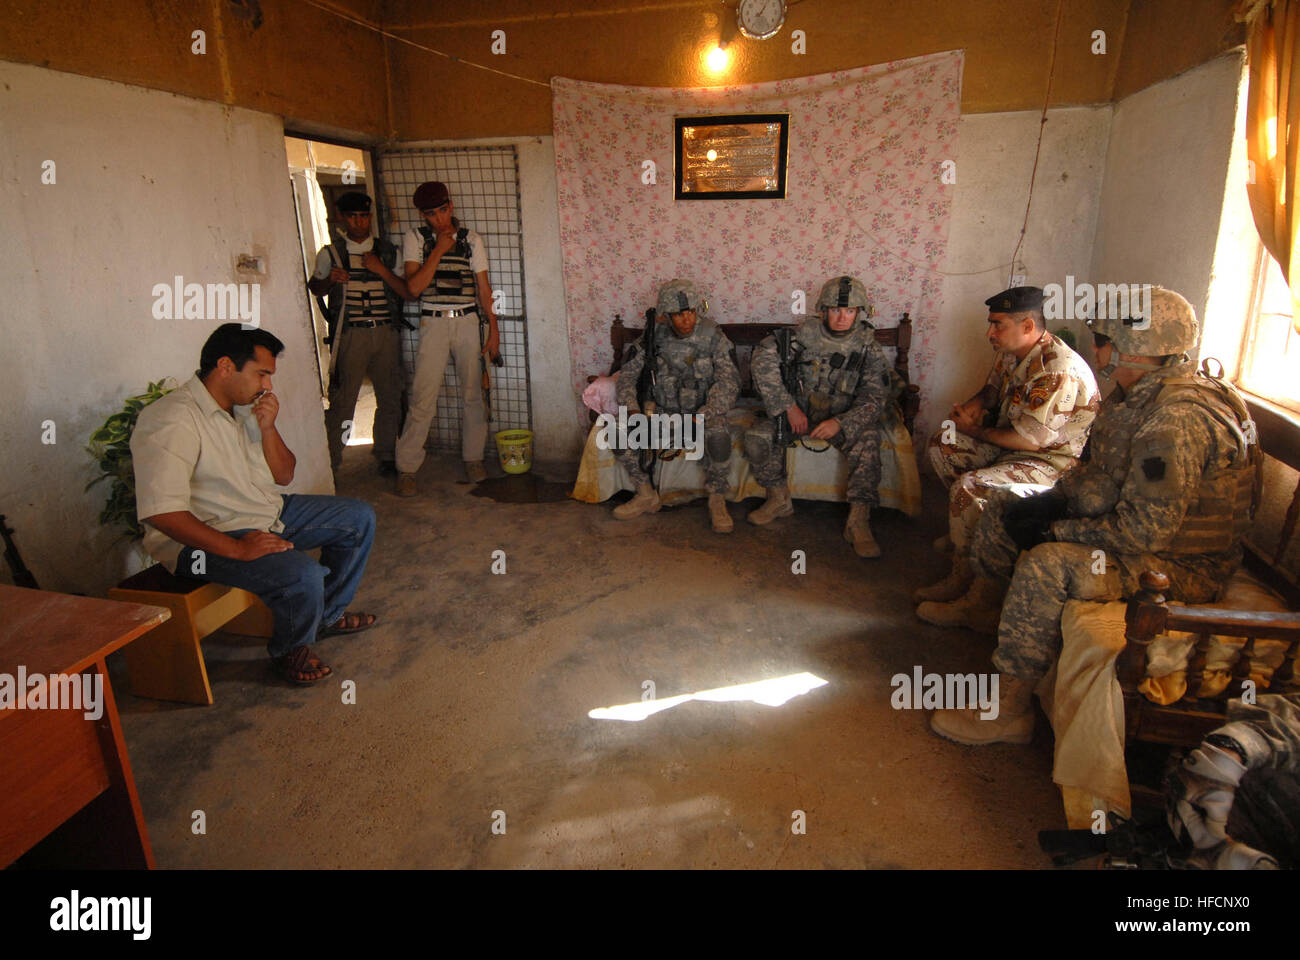 U.S. Soldiers attached to the 2nd Brigade, 1st Infantry Division, along with Iraqi soldiers with the 6th Iraqi army, meet with the Sons of Iraq at their headquarters in the province of Nassir Wa Salam in Abu Ghraib, Iraq, on May 16. Patrol in Abu Ghraib 174020 Stock Photo